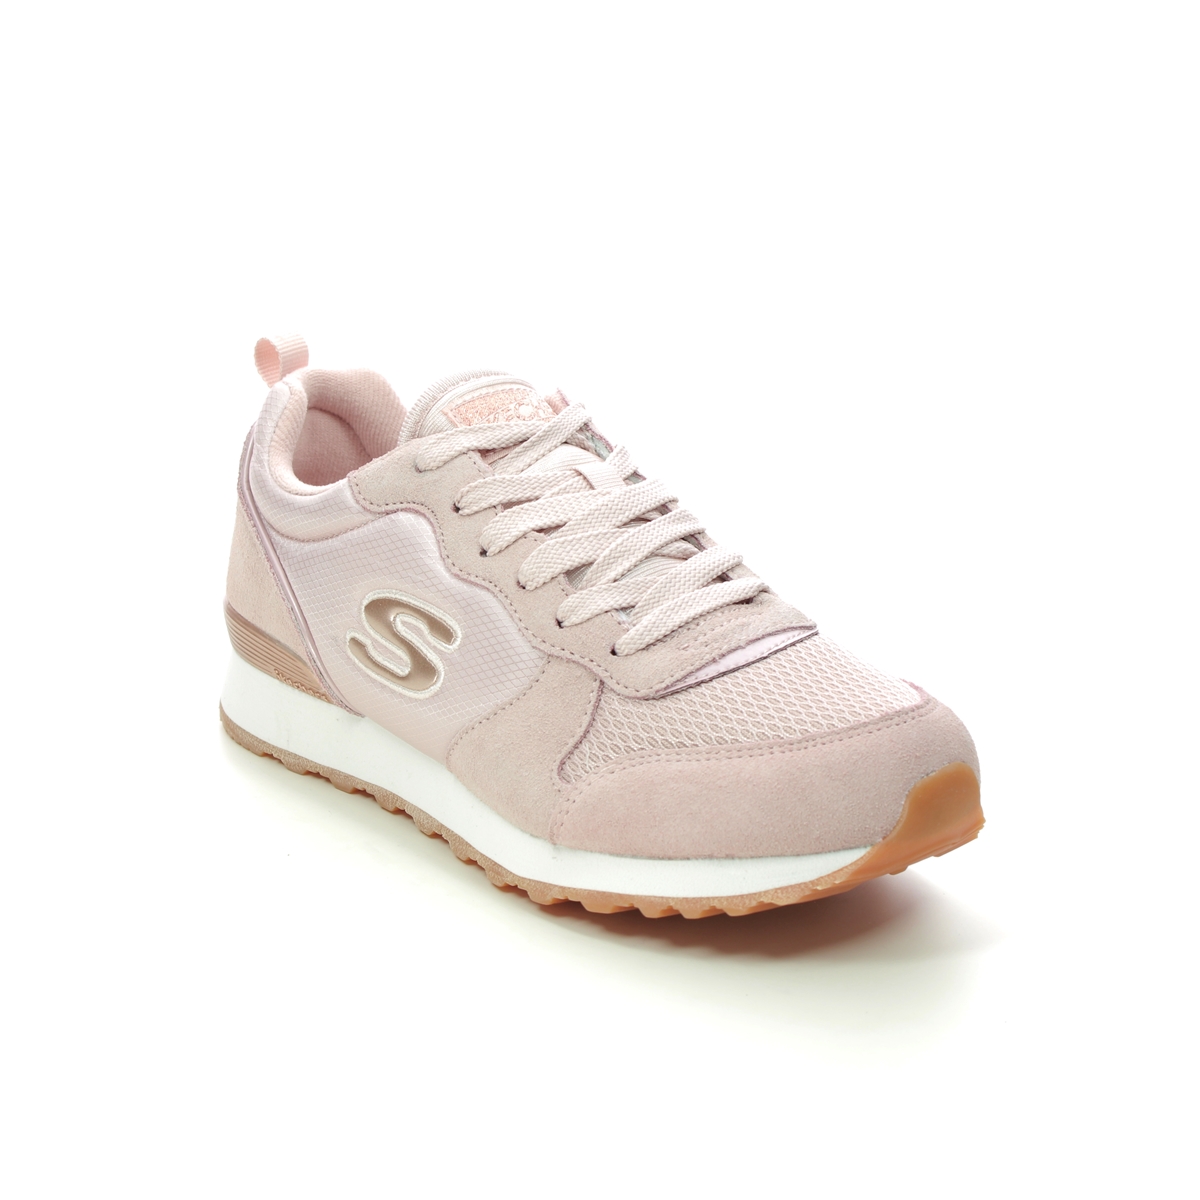 Skechers Og 85 Gold Gurl Blush Pink Womens Trainers 111 In Size 6 In Plain Blush Pink